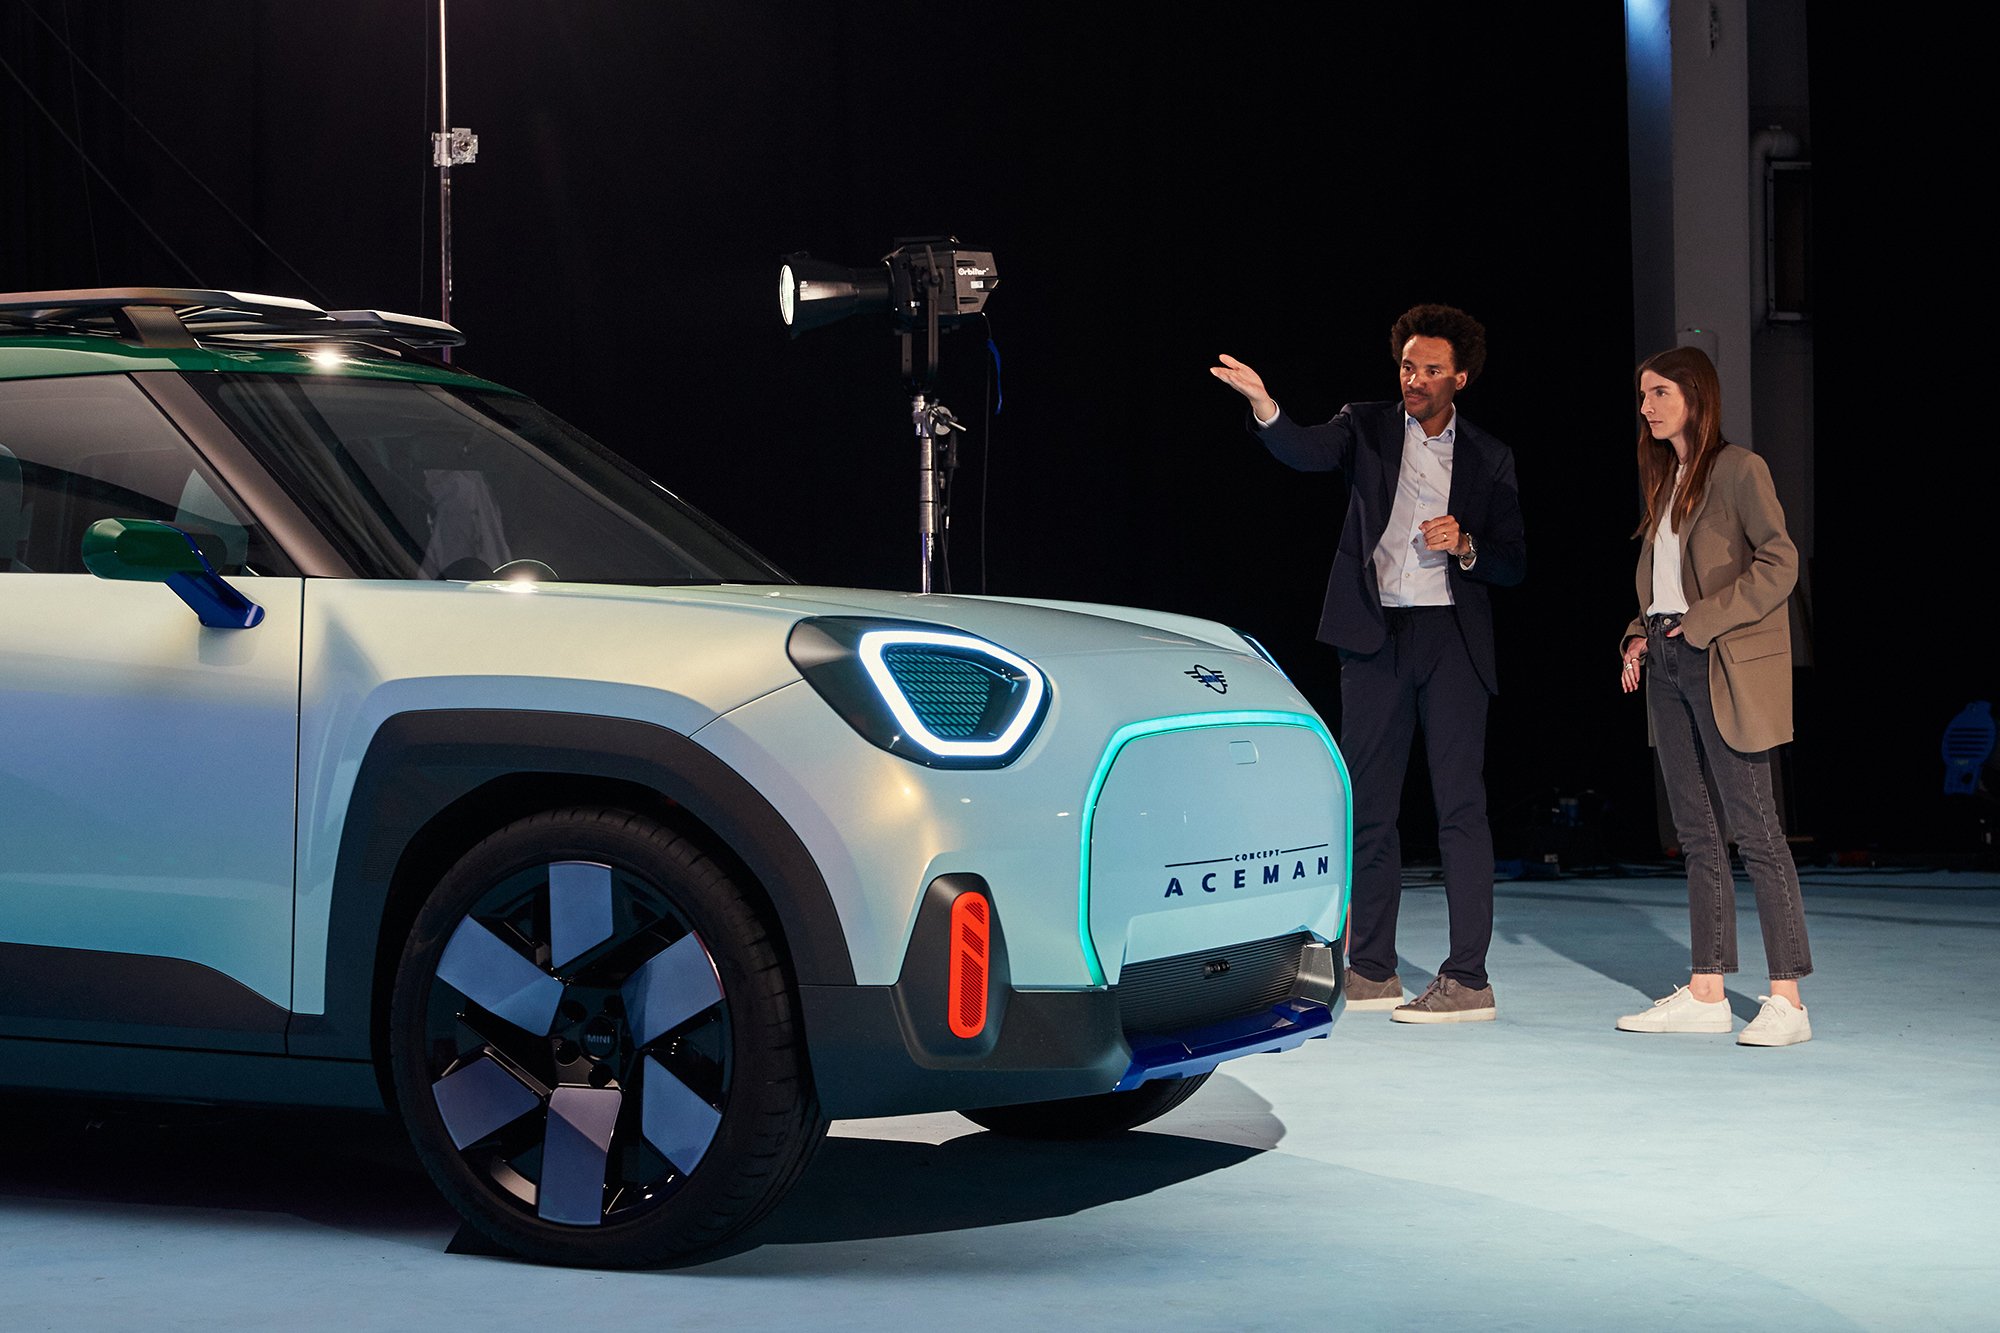 ellectric — Experience the MINI Concept Aceman world premiere with